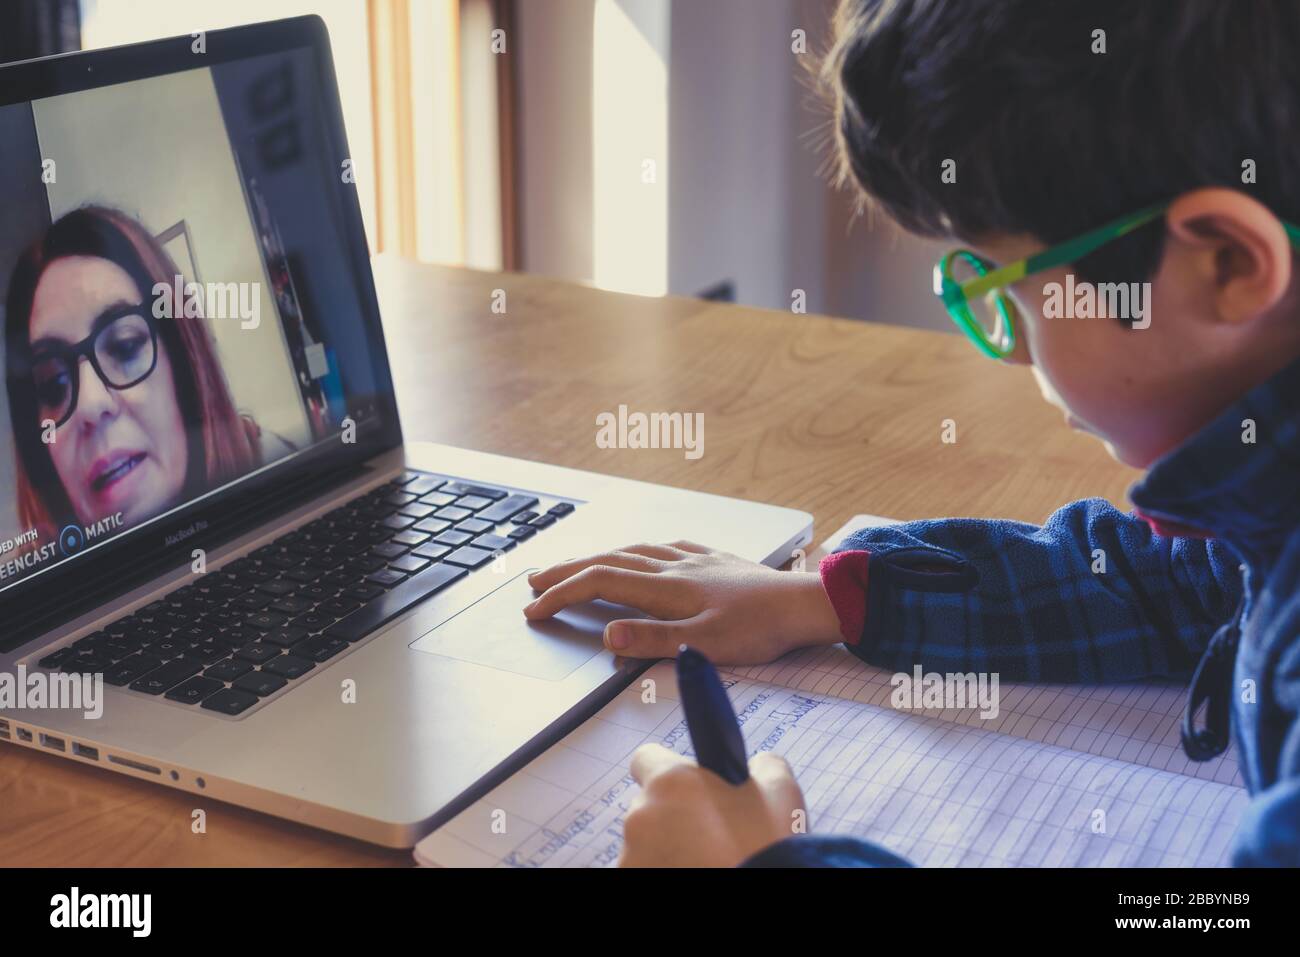 kid using a laptop for his homework. E-learning concept. Boy employing on line education during self isolation time. Stock Photo